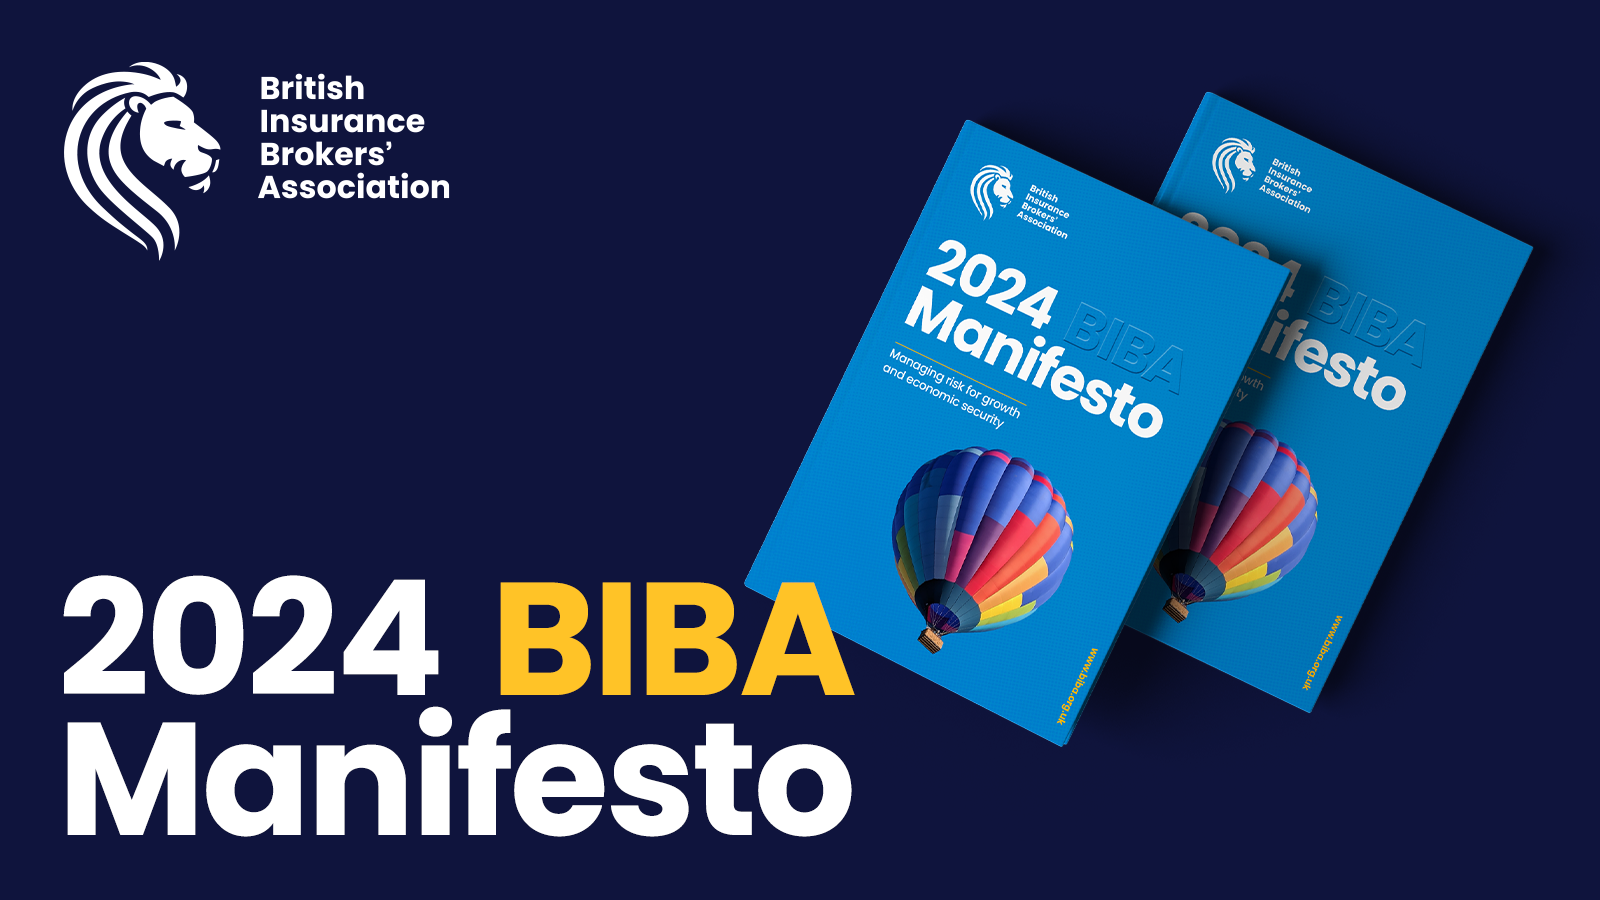 BIBA’s 2024 Manifesto, ‘Managing risk for growth and economic security ...